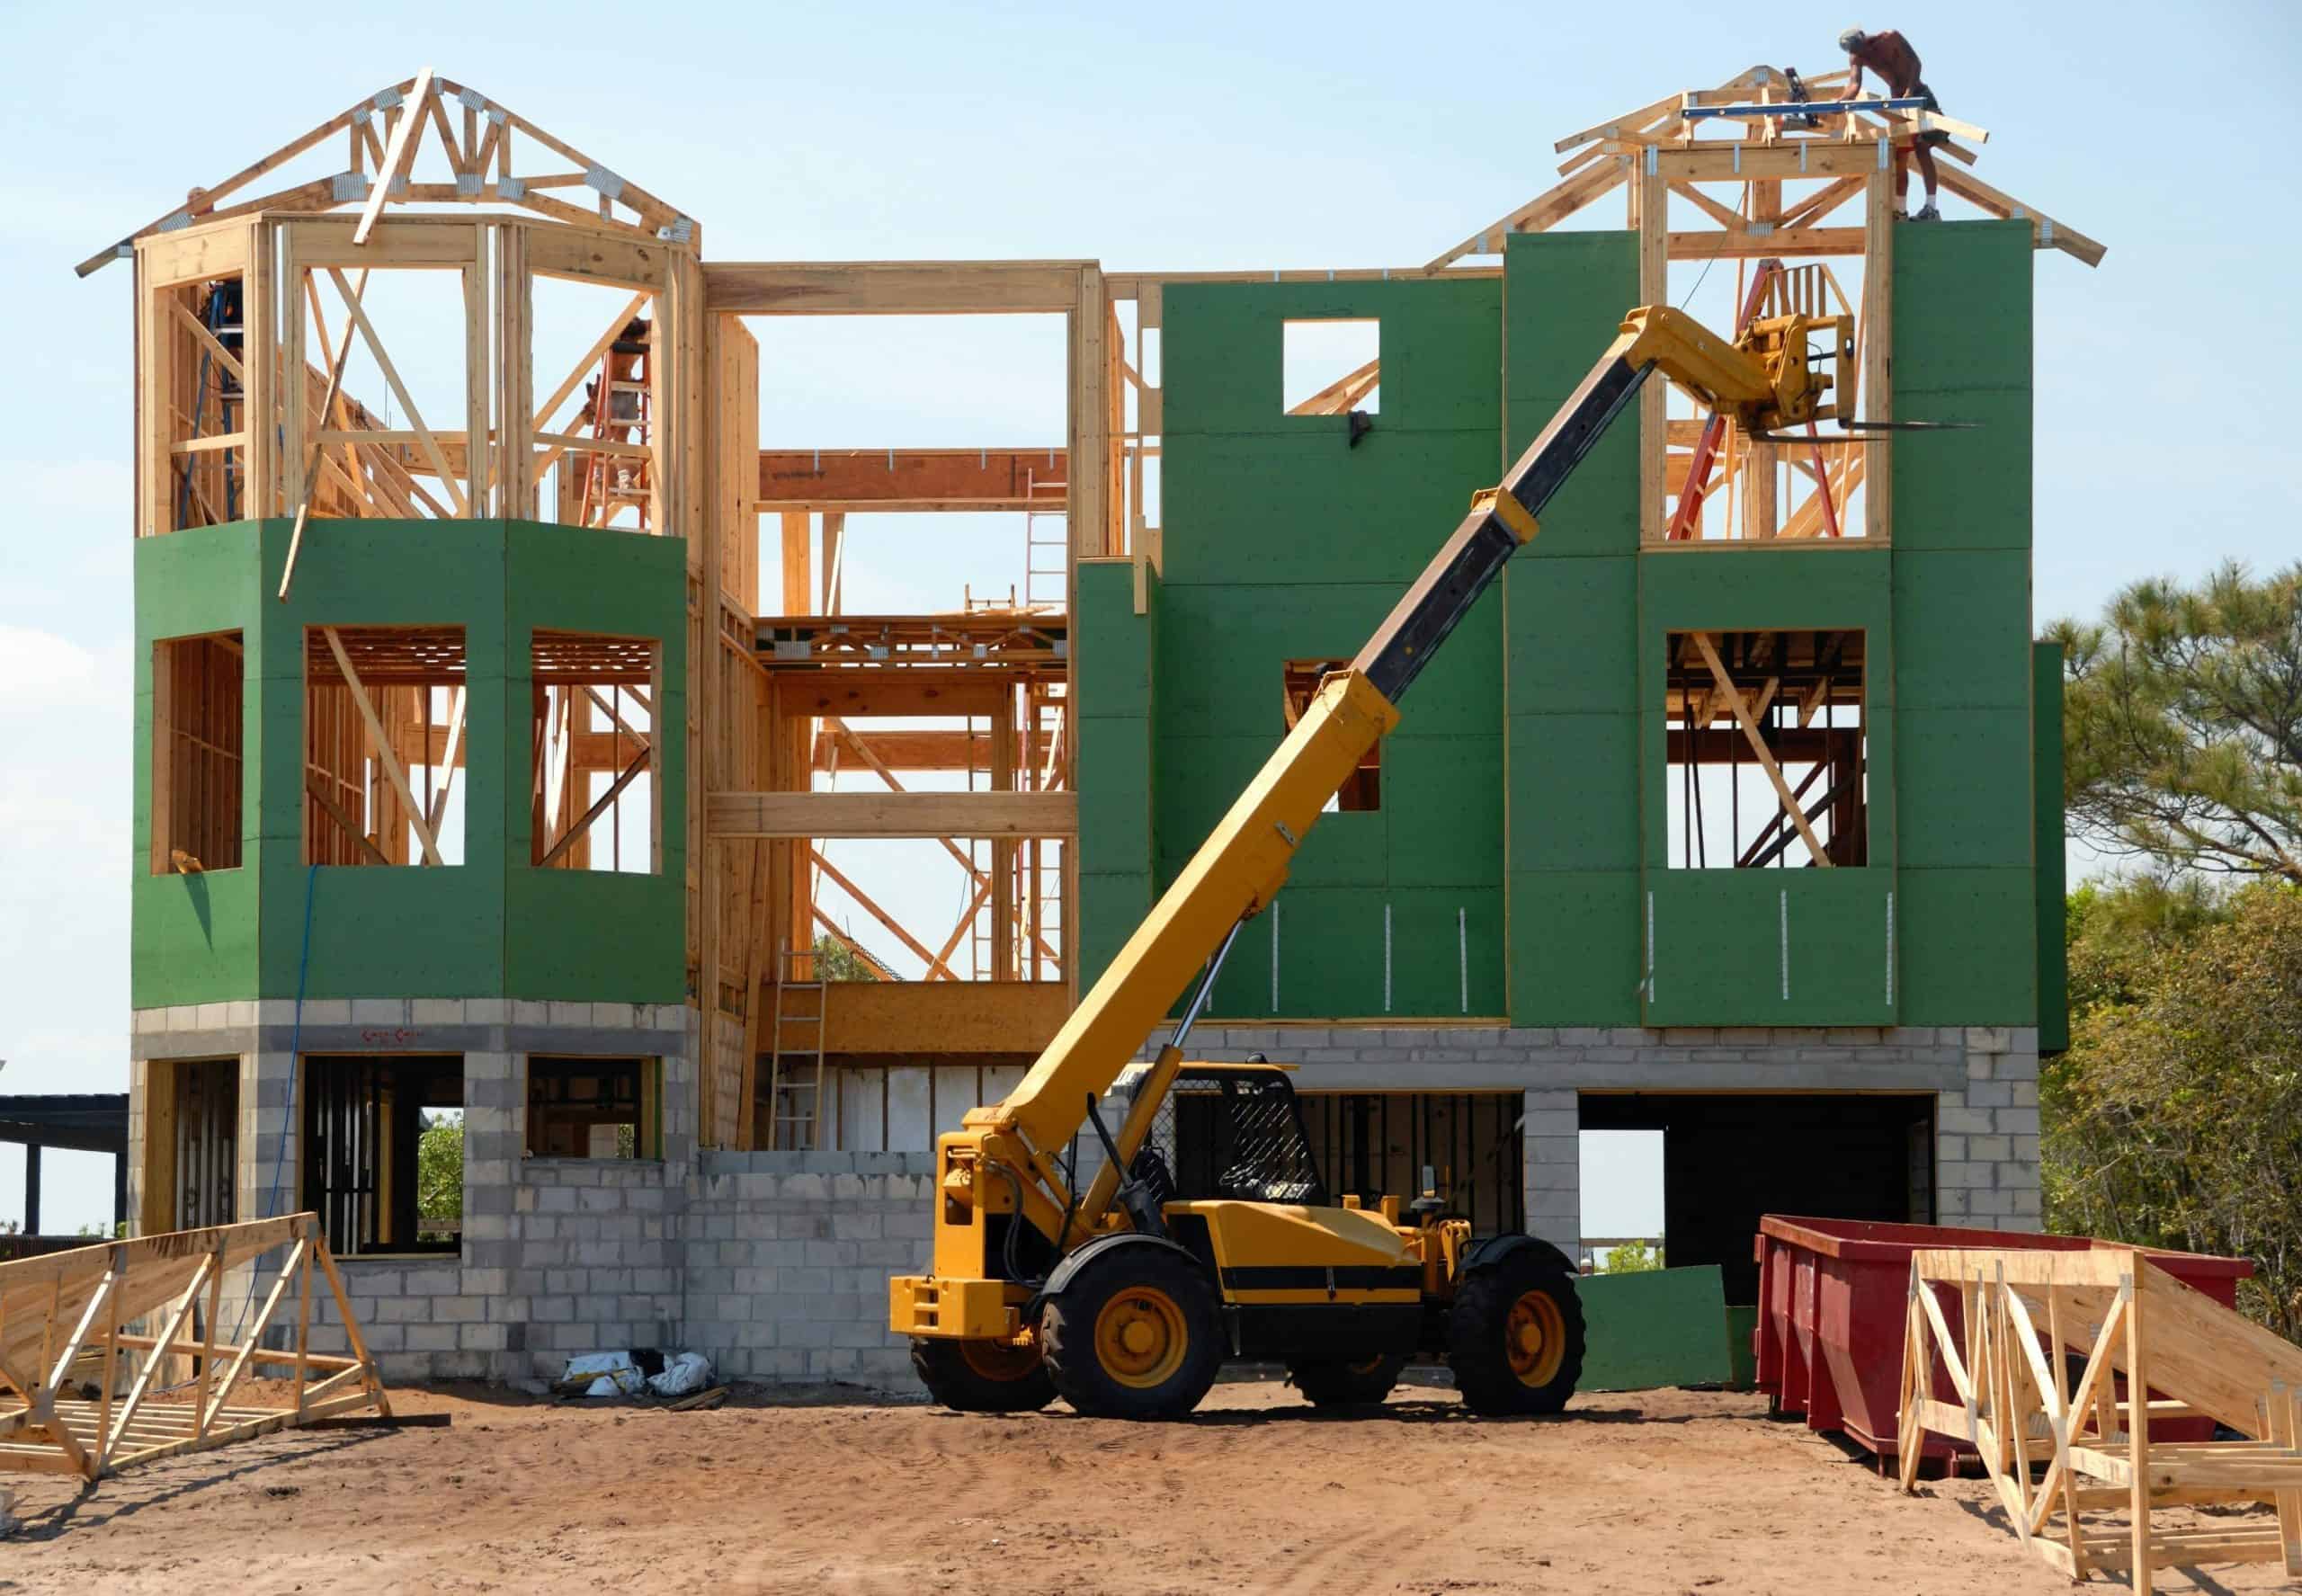 Developer charges slashed up to 25% for rental builds to meet province's housing goals